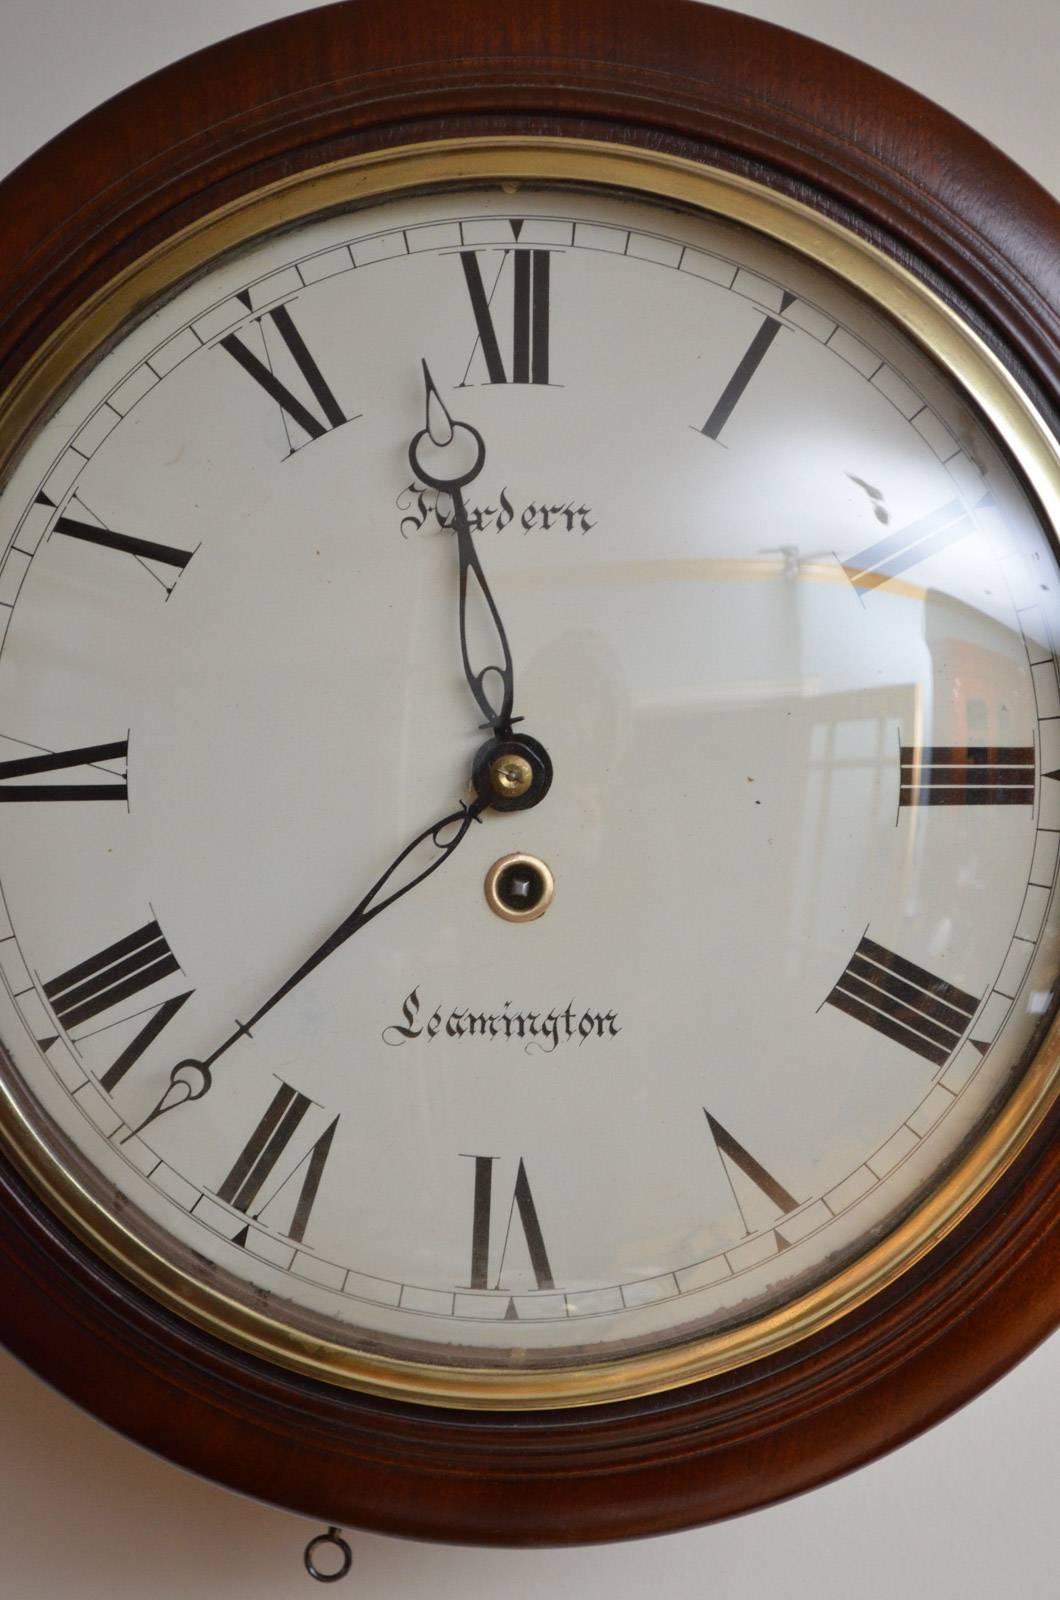 Sn3412, very attractive early Victorian wall clock, having original brass bezel, painted dial with Roman numerals signed Hordern Leamington, original hands and single fuse movement, all in mahogany case, circa 1850.
The movement has been cleaned